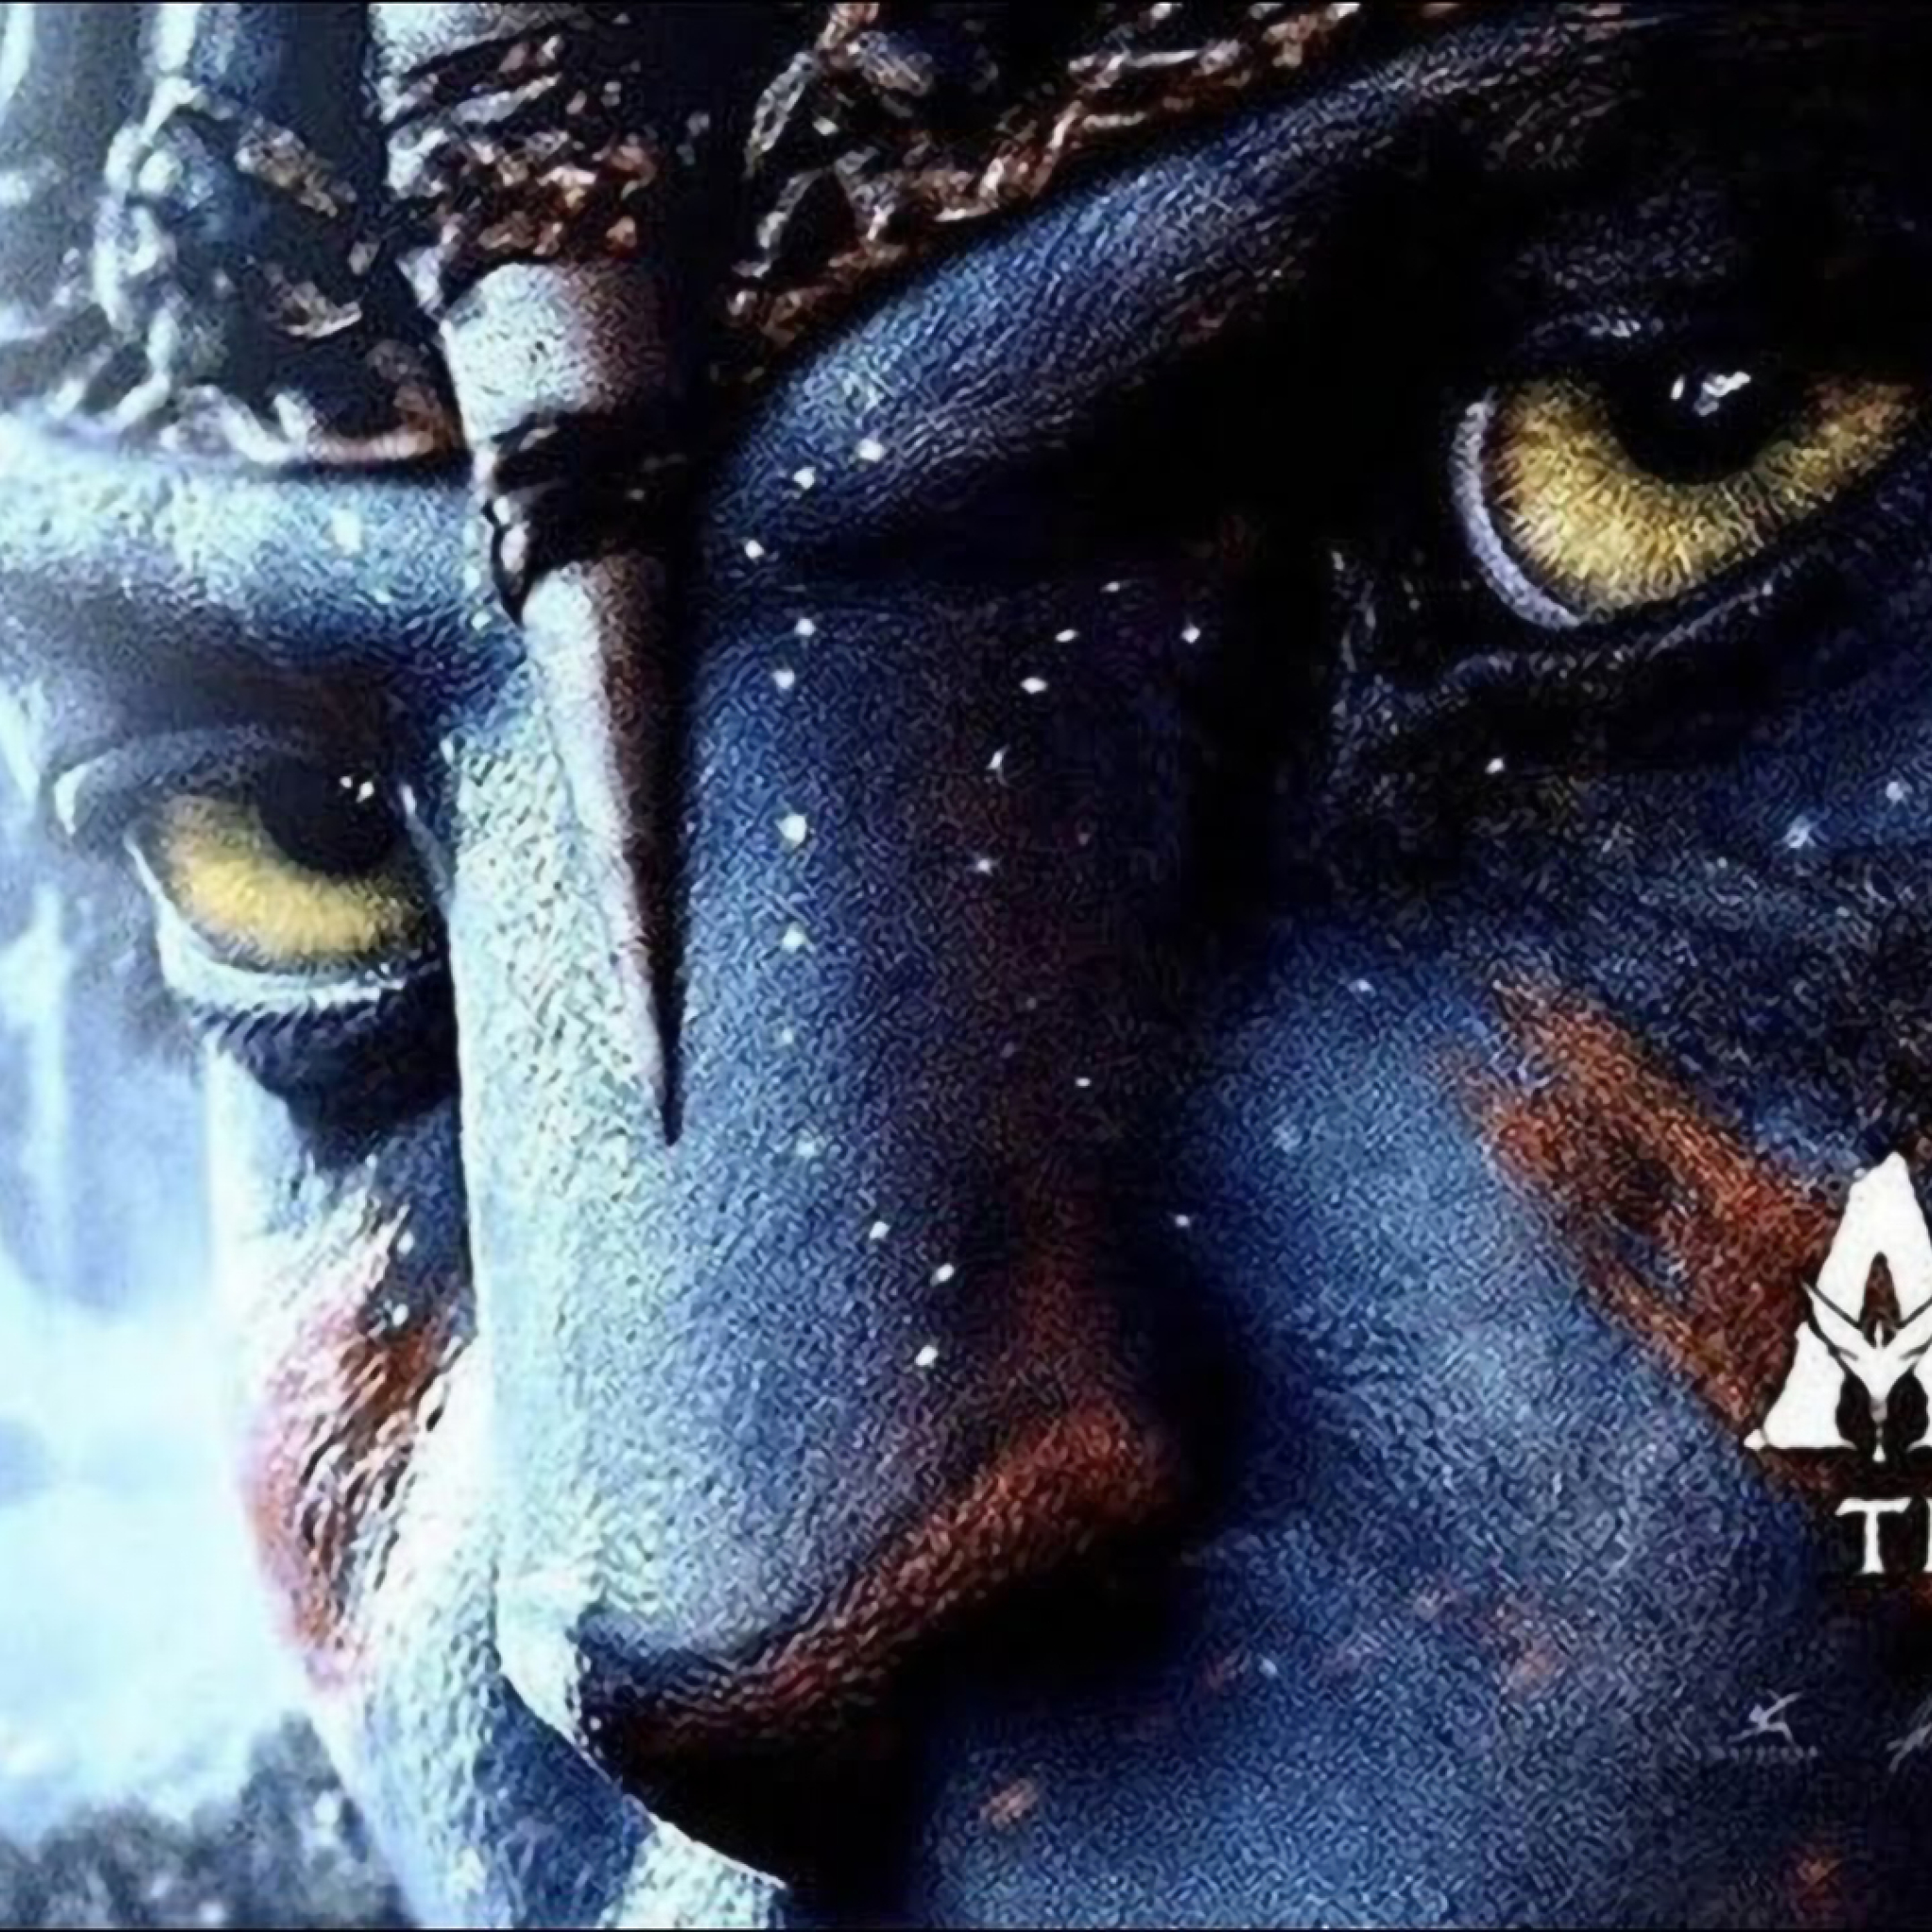 Avatar: The Way of Water instal the new